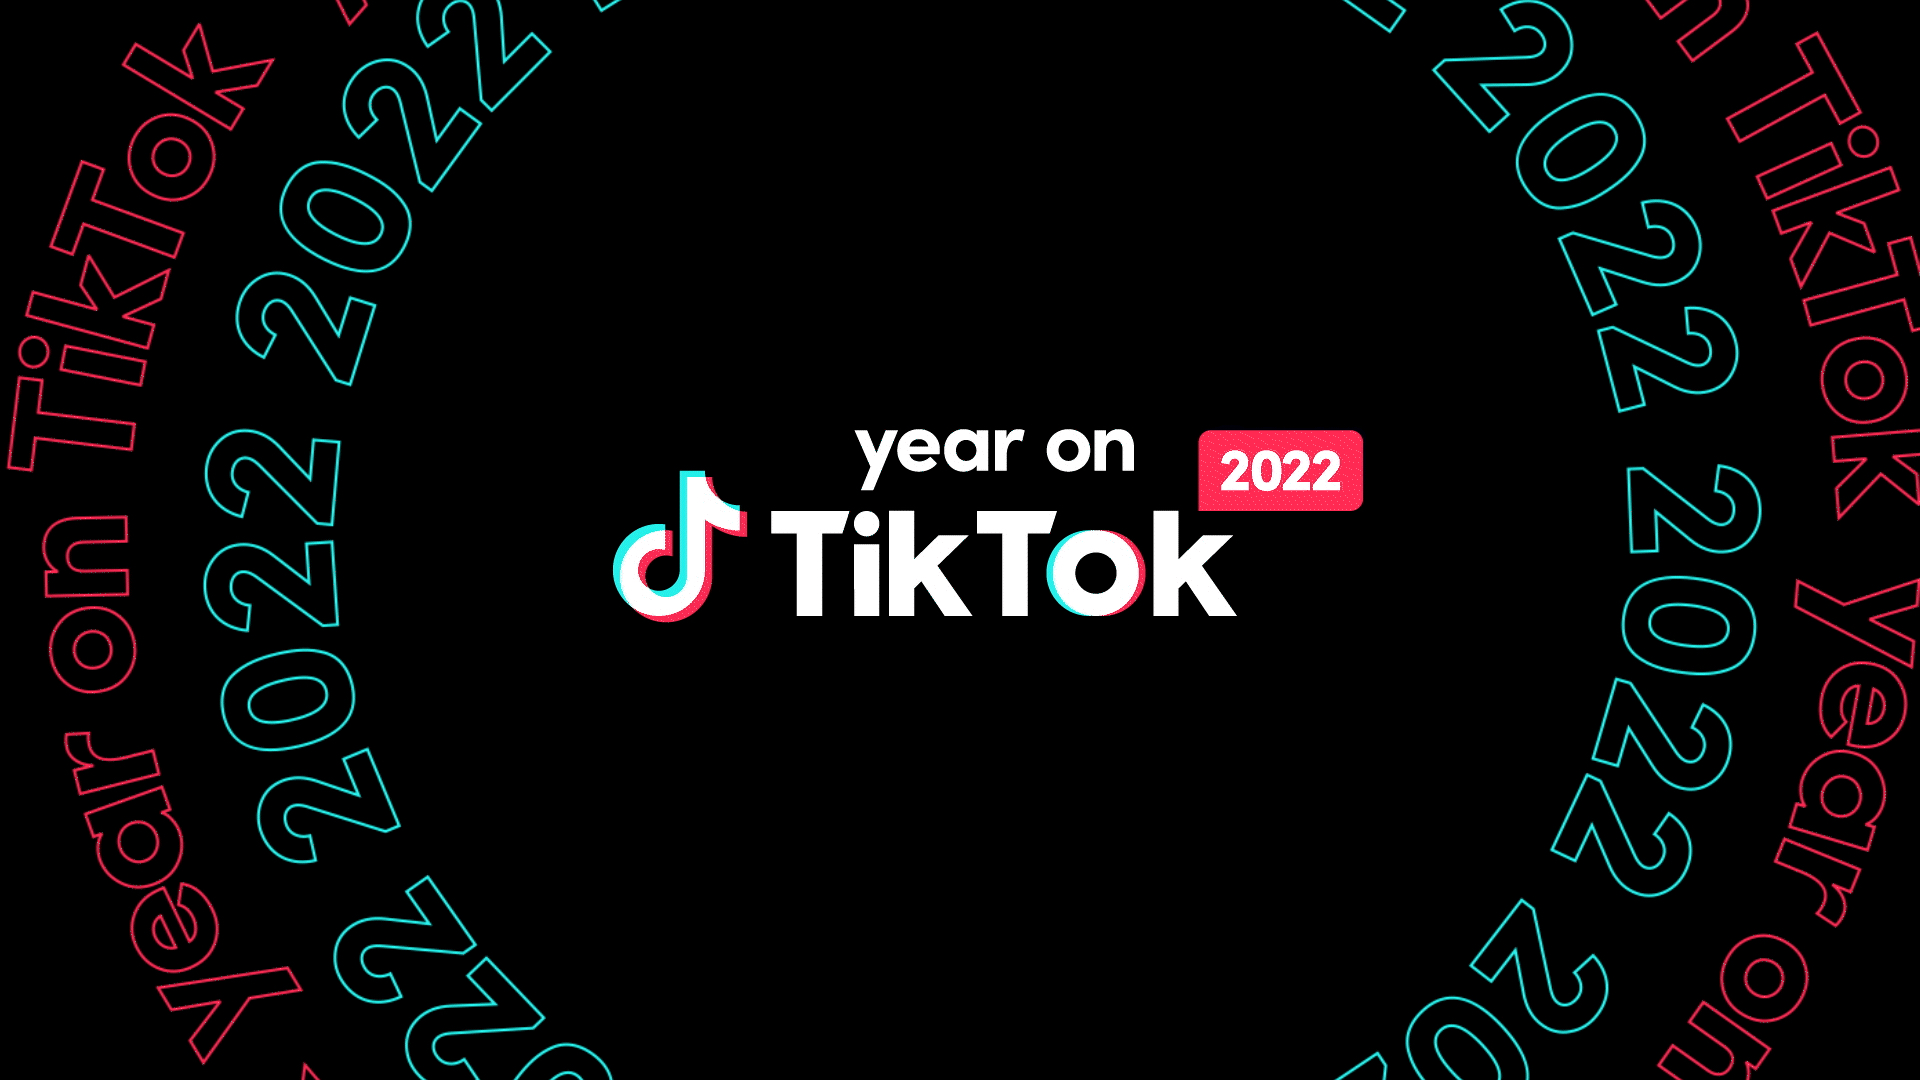 Year on TikTok 2022: The biggest music and artists in 2022